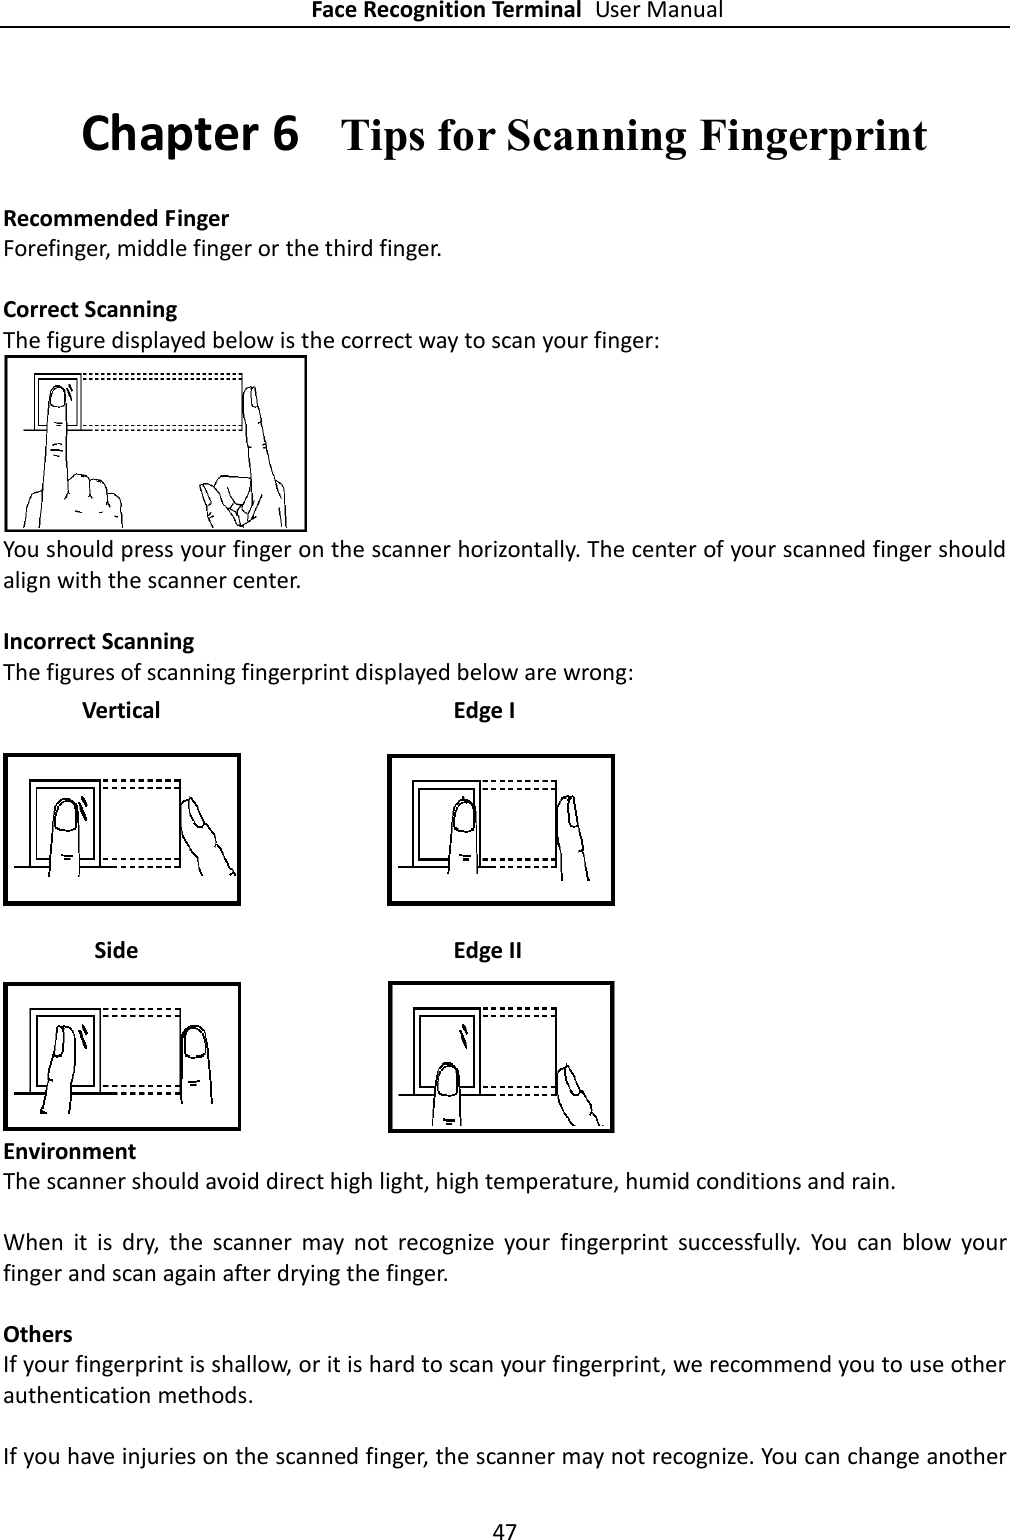 Page 47 of Hangzhou Hikvision Digital Technology K1T604 Face Recognition Terminal User Manual 